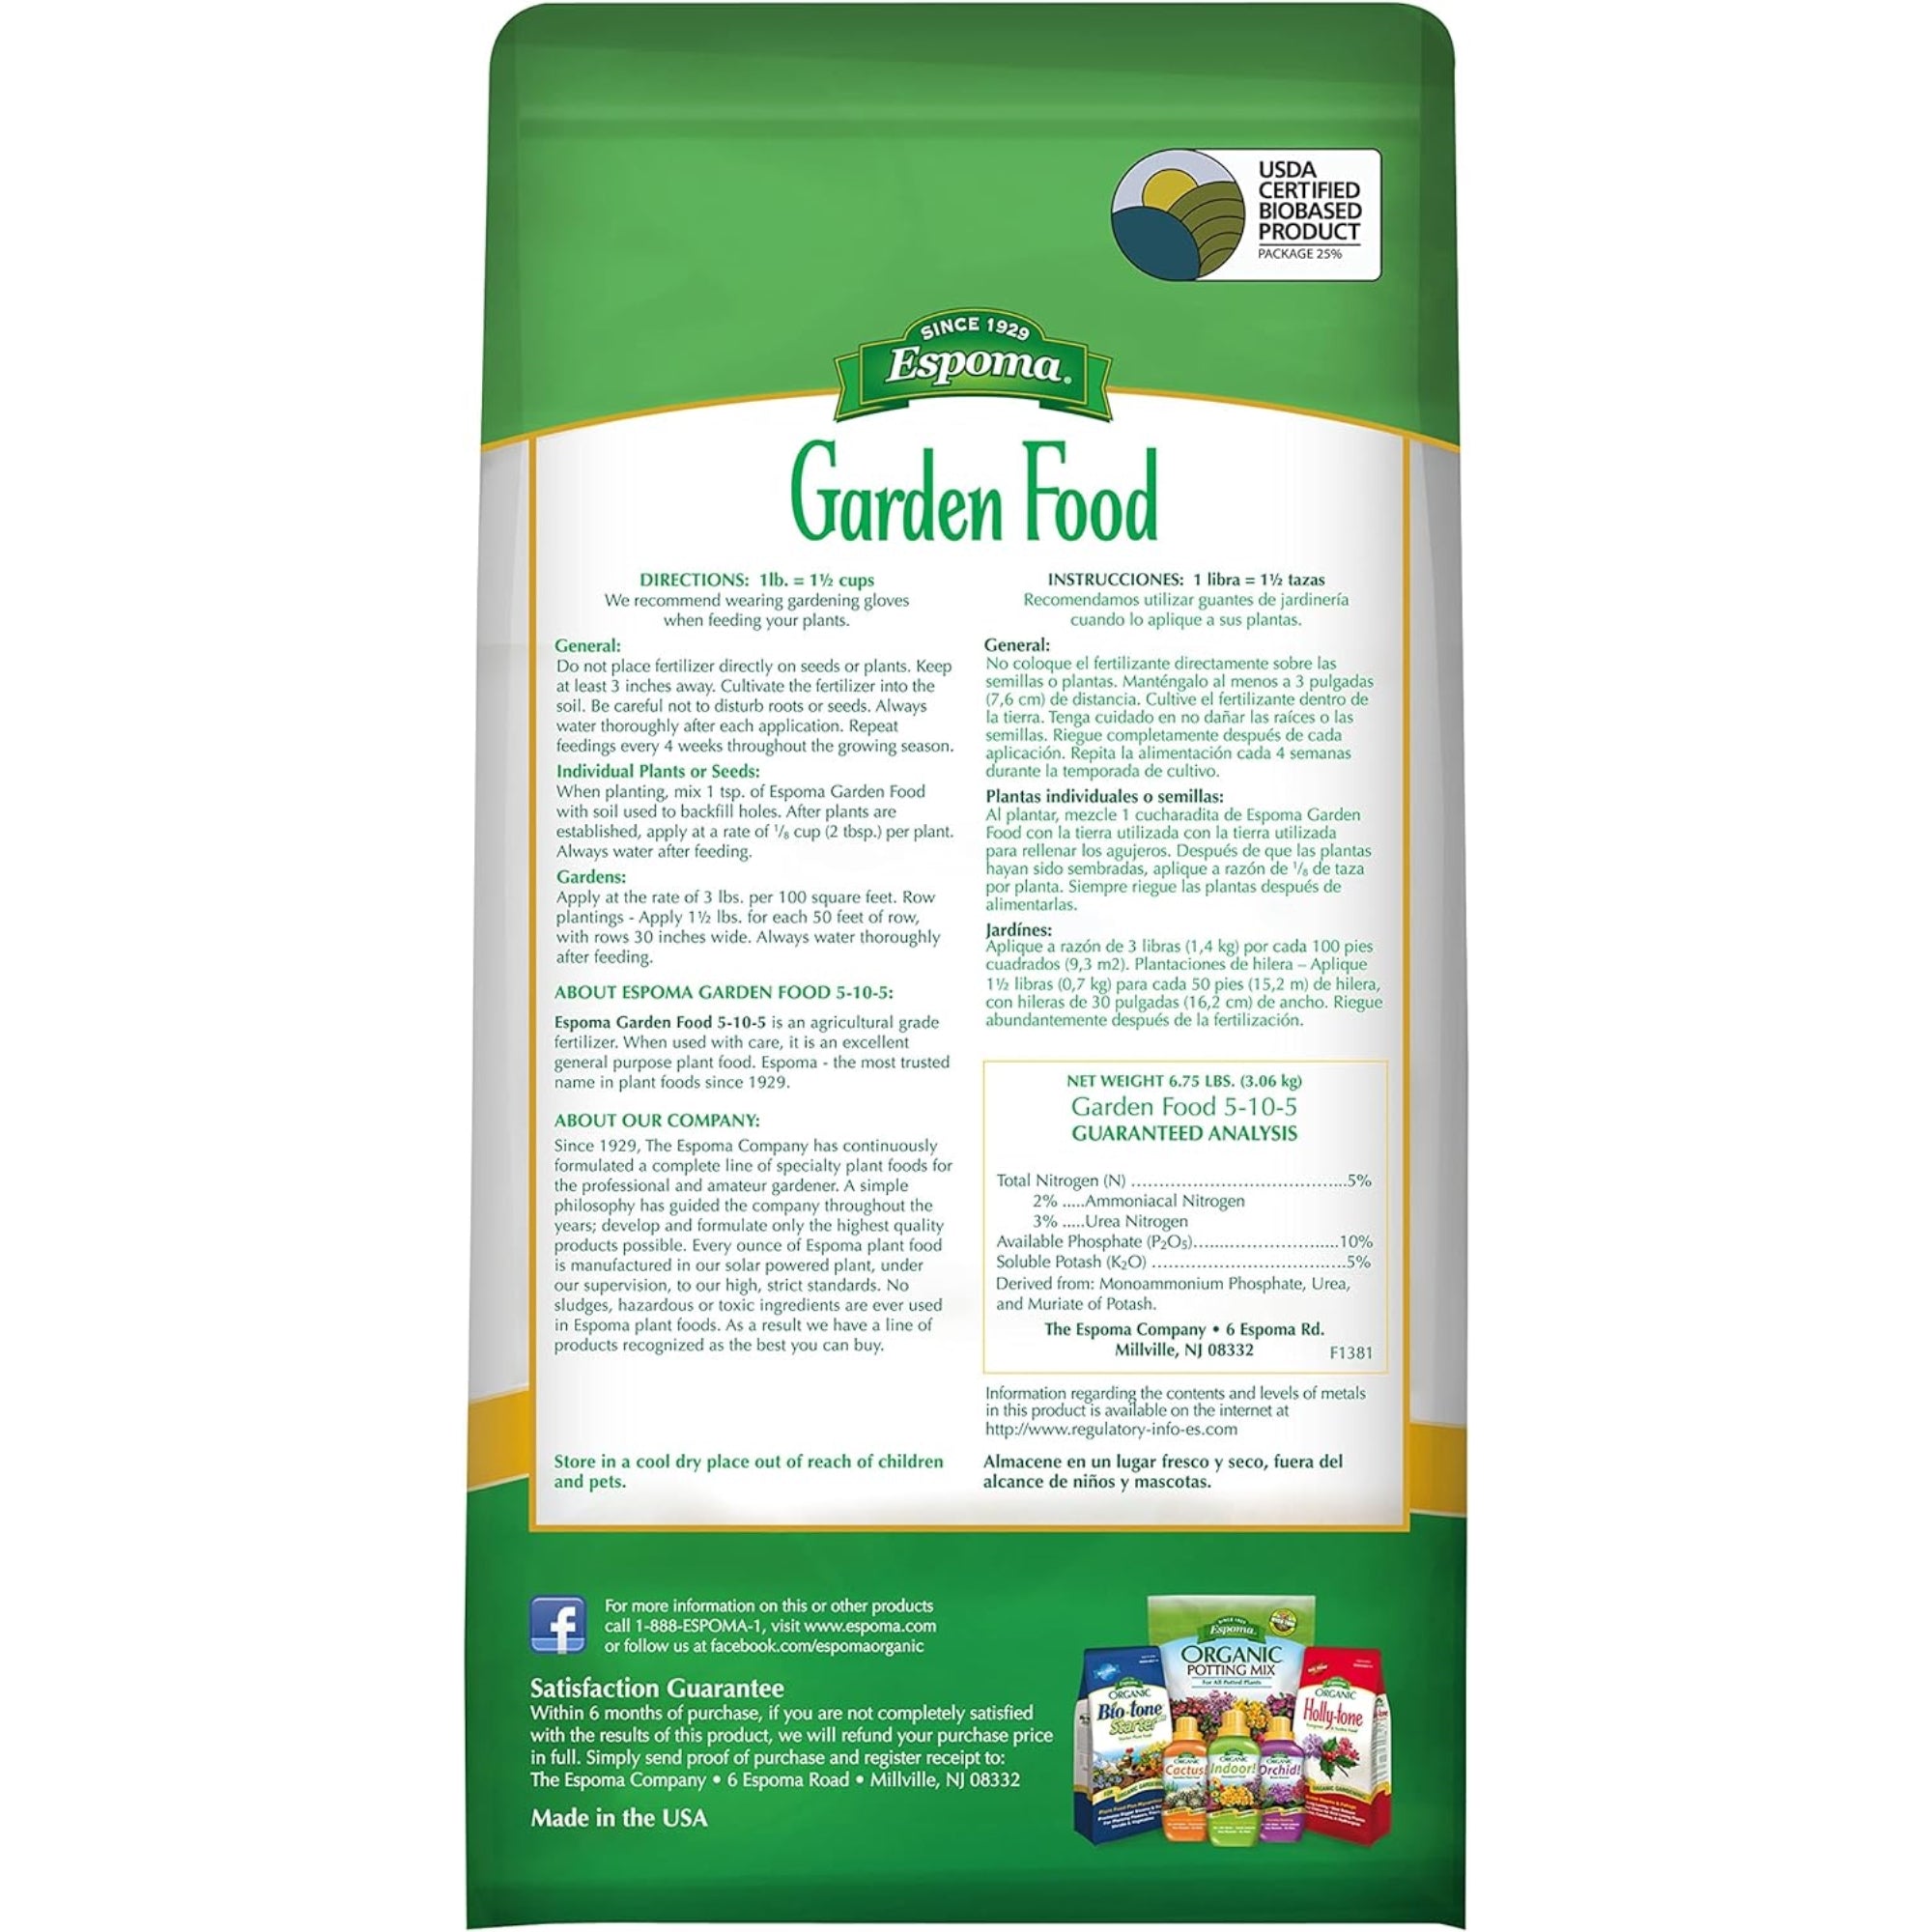 Espoma Garden Food 5-10-5 General Purpose Plant Food for Herbs and Vegetables, Feeds Plants Quickly, 6.75lbs